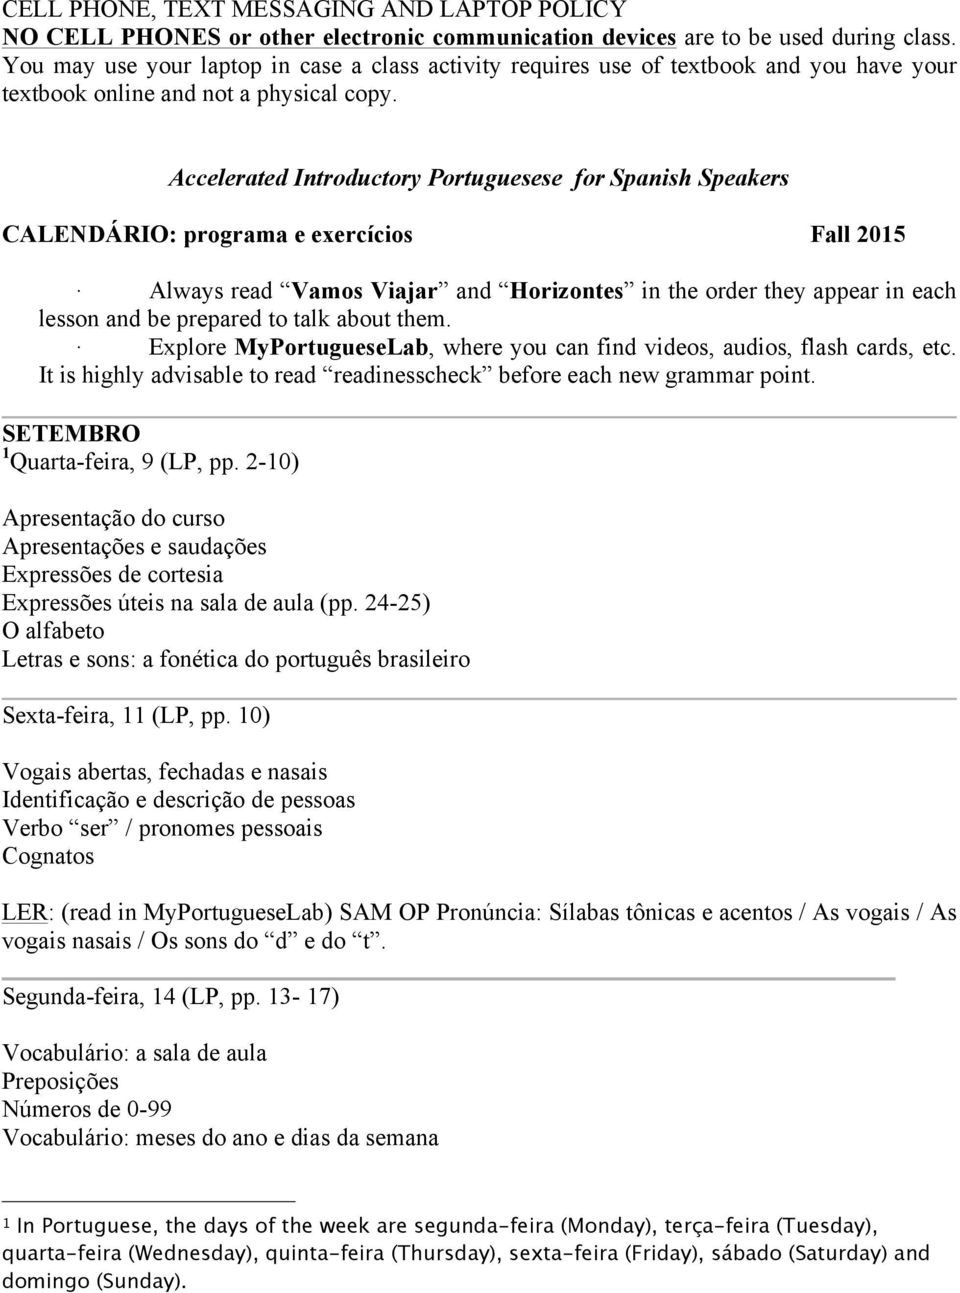 Accelerated Introductory Portuguesese for Spanish Speakers CALENDÁRIO: programa e exercícios Fall 2015 Always read Vamos Viajar and Horizontes in the order they appear in each lesson and be prepared